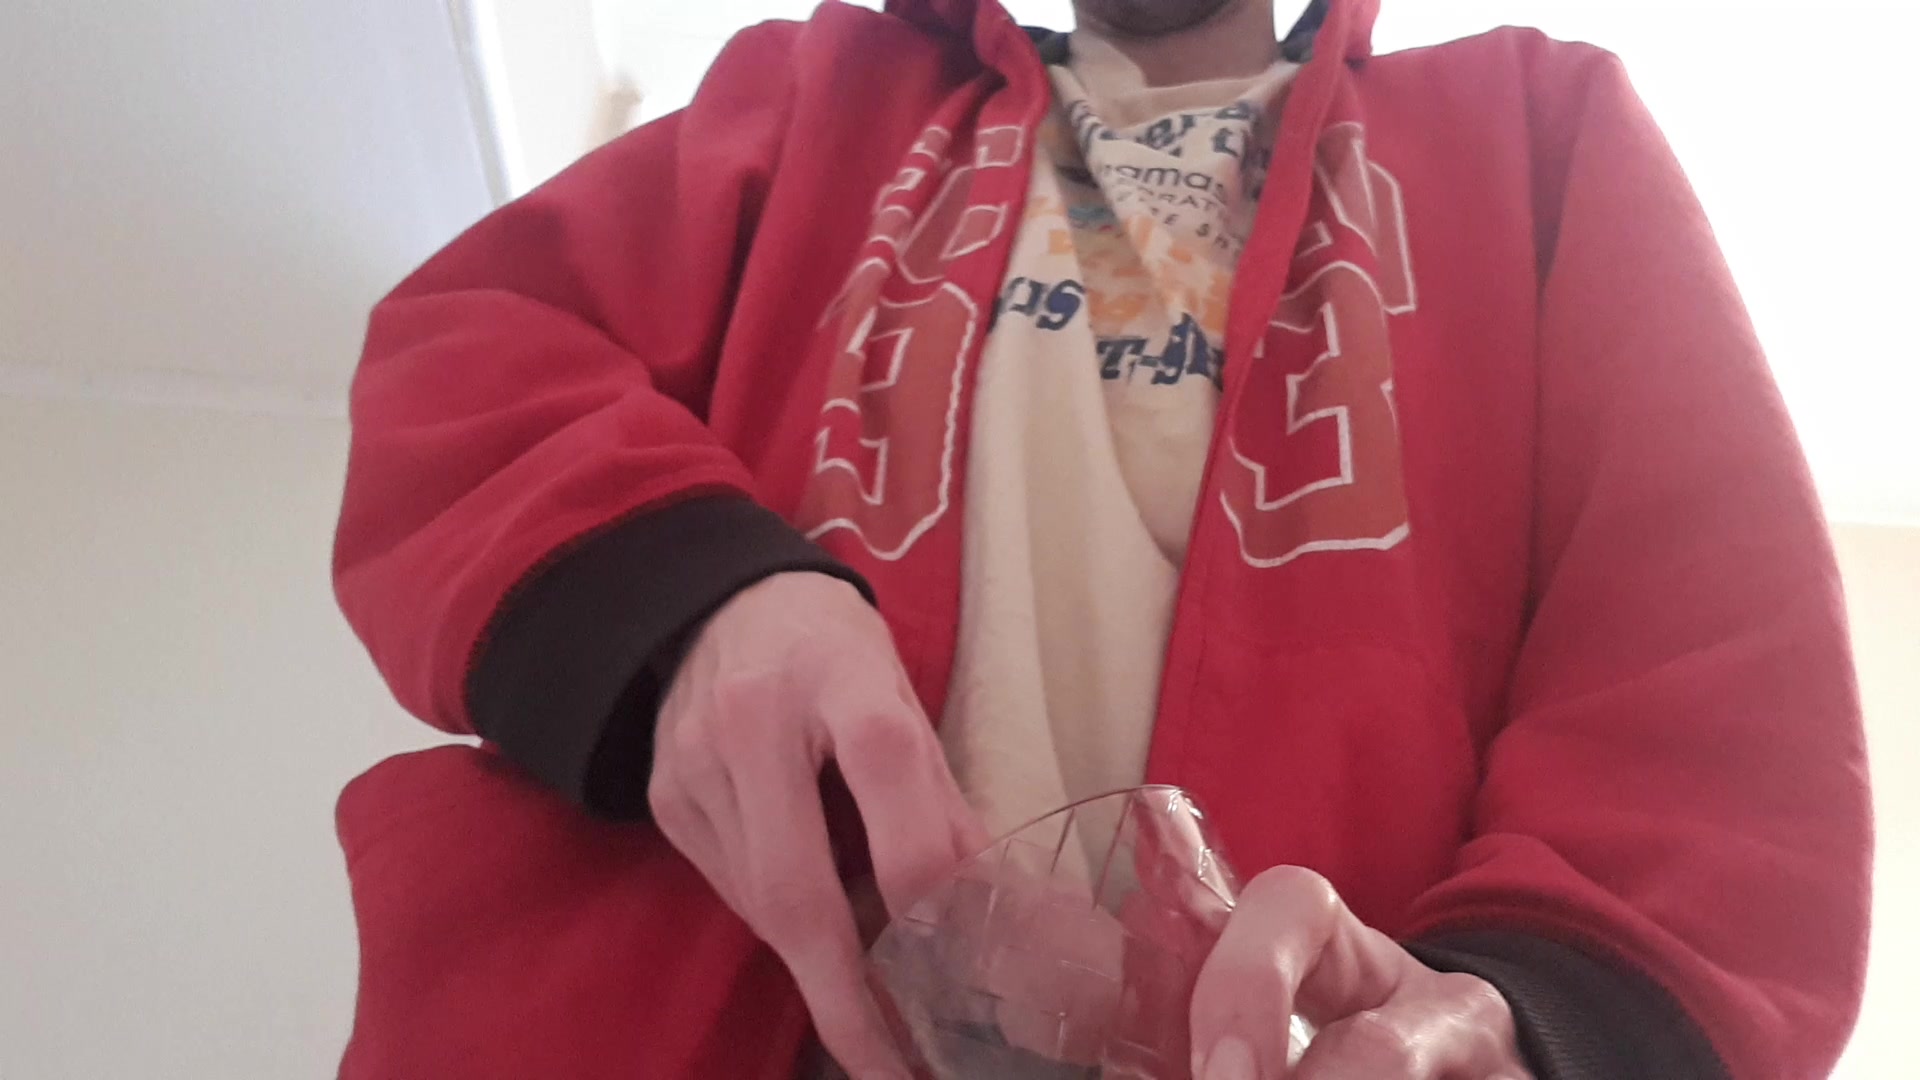 Eating shit and drinking piss - video 2